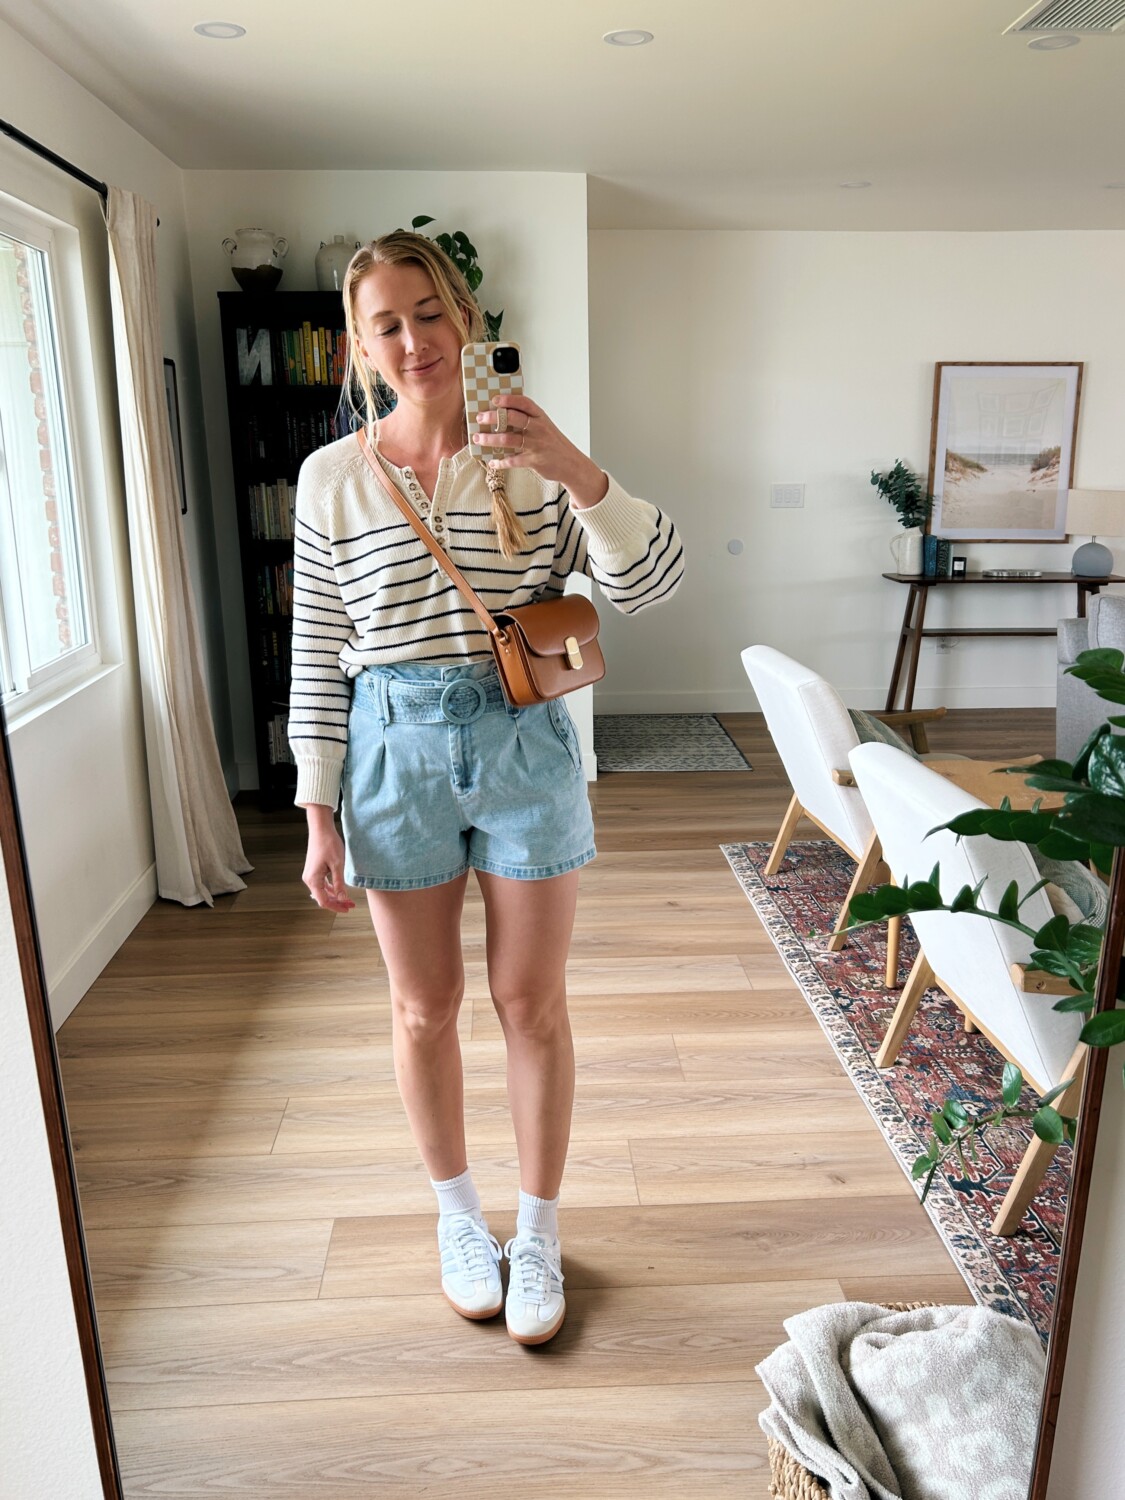 Ruth Nuss wearing her Sézane Milo Bag with belted denim shorts and tennis shoes.